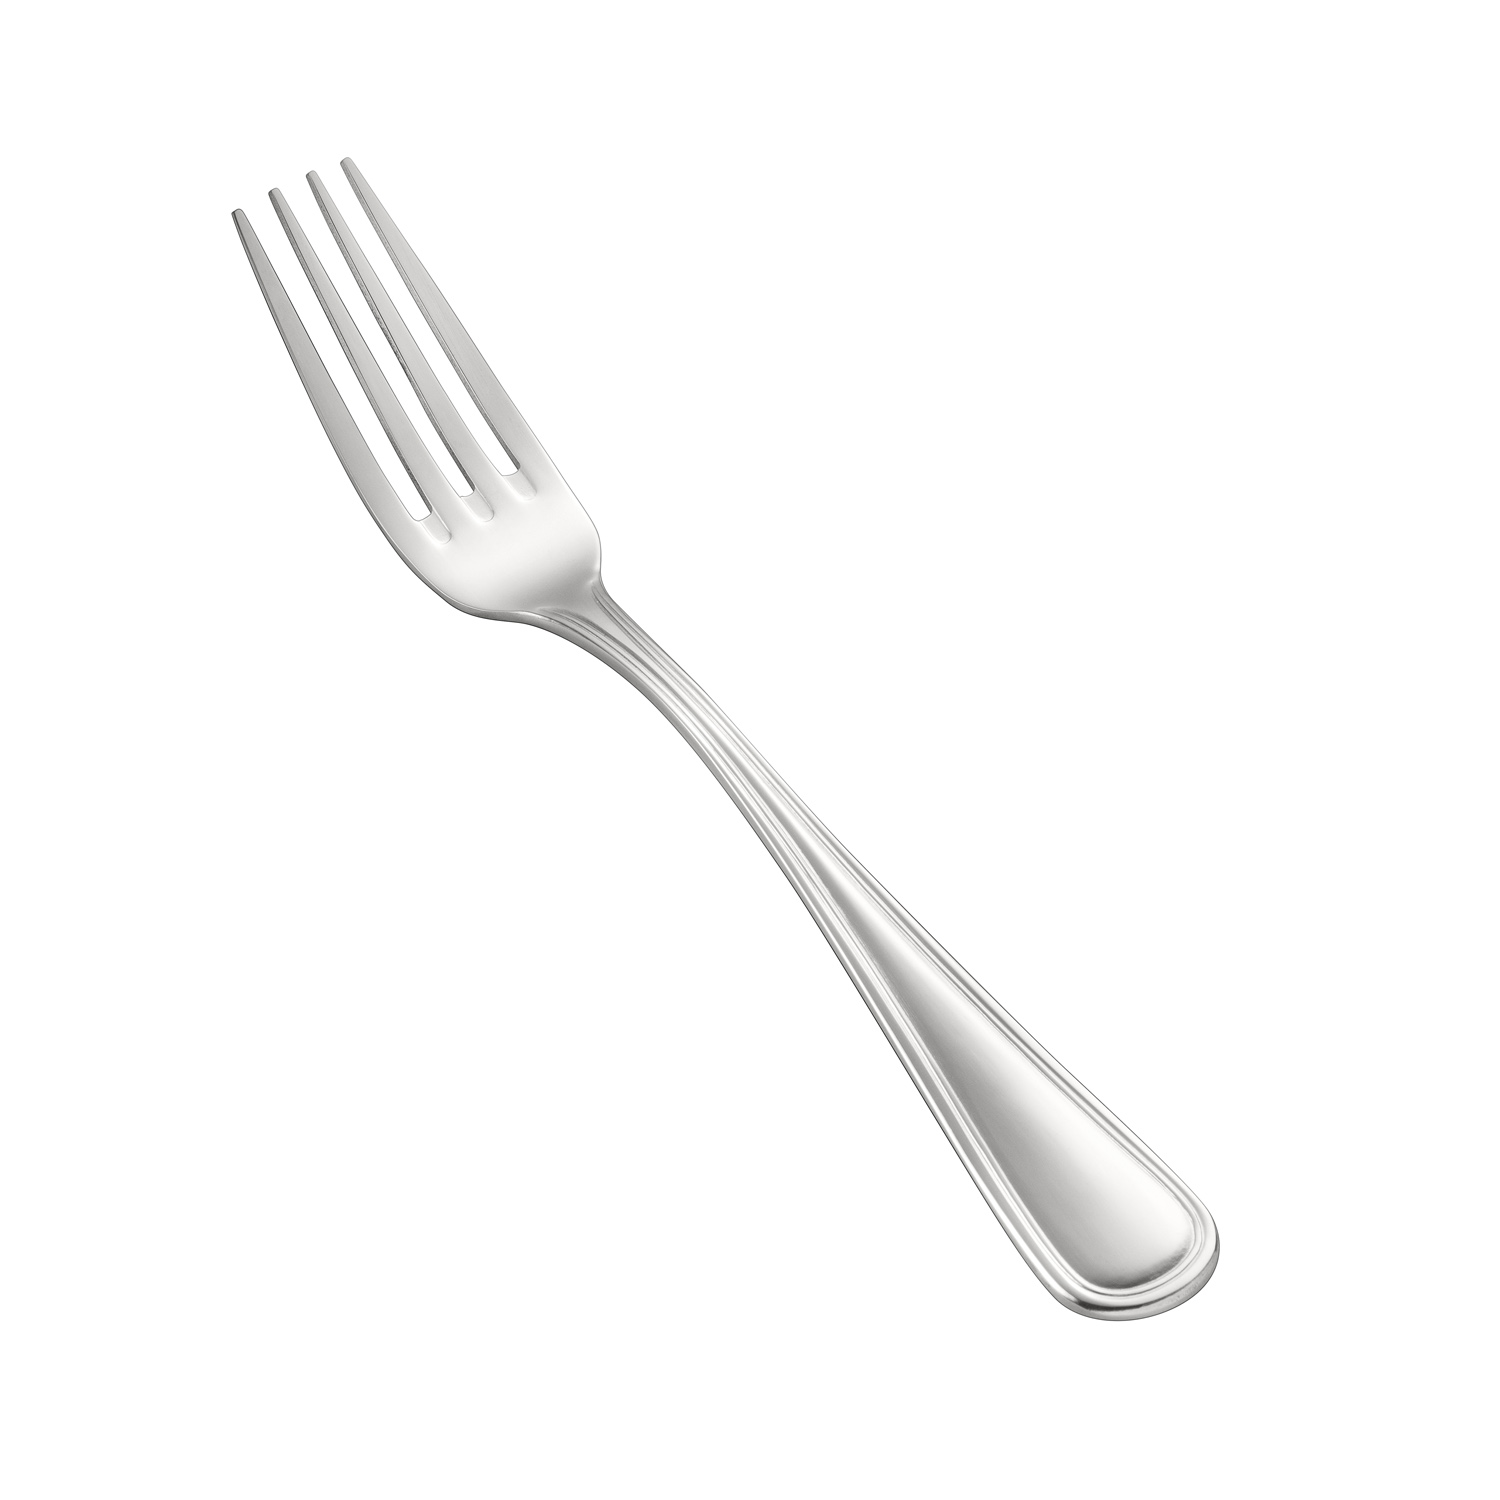 CAC China 8002-11 Elite Table Fork, Extra Heavyweight 18/8, 8"